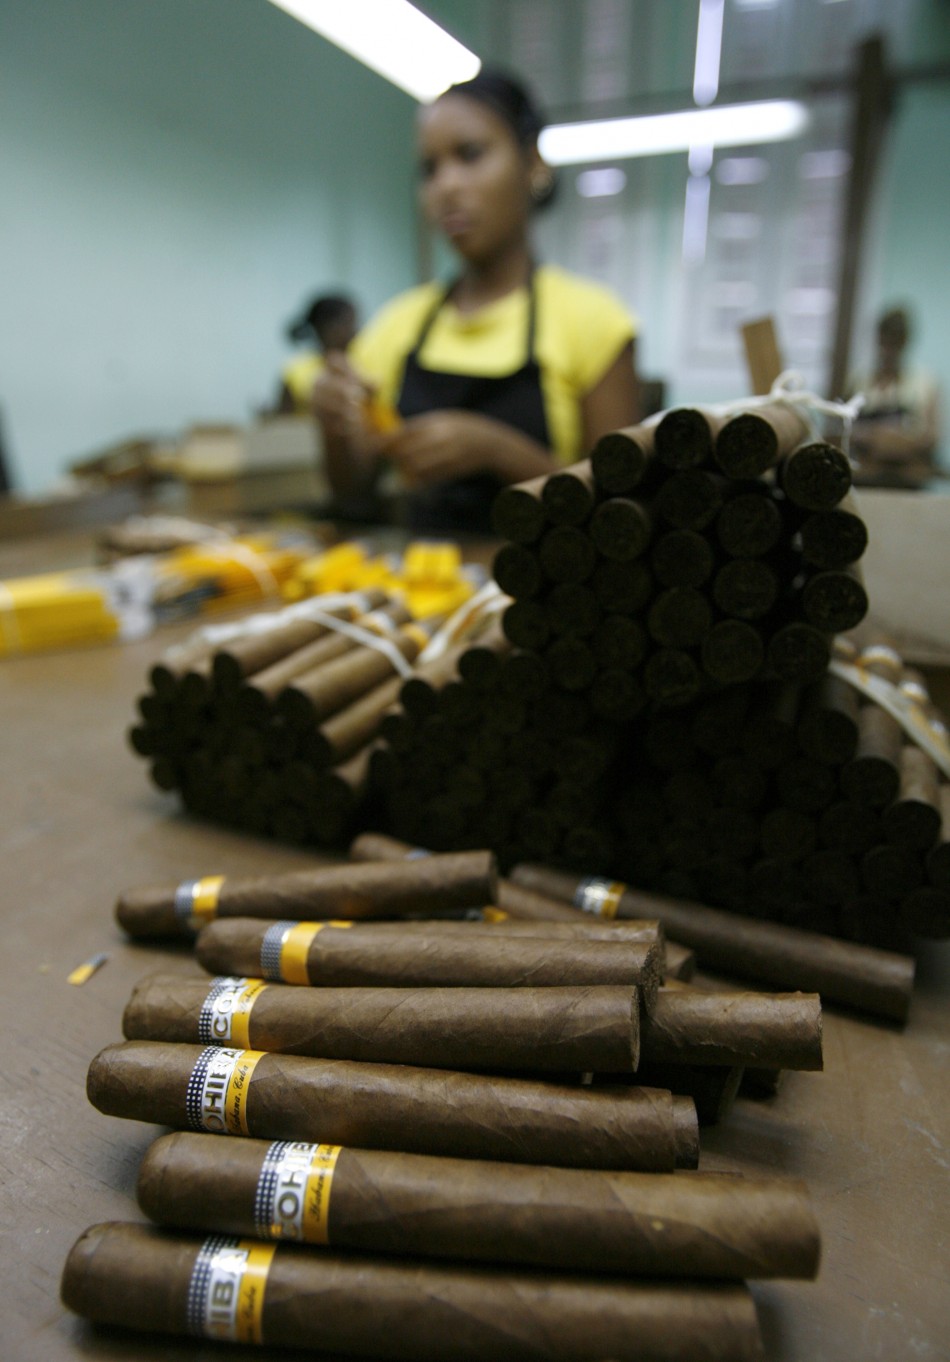 Cigars ready to be packed in boxes